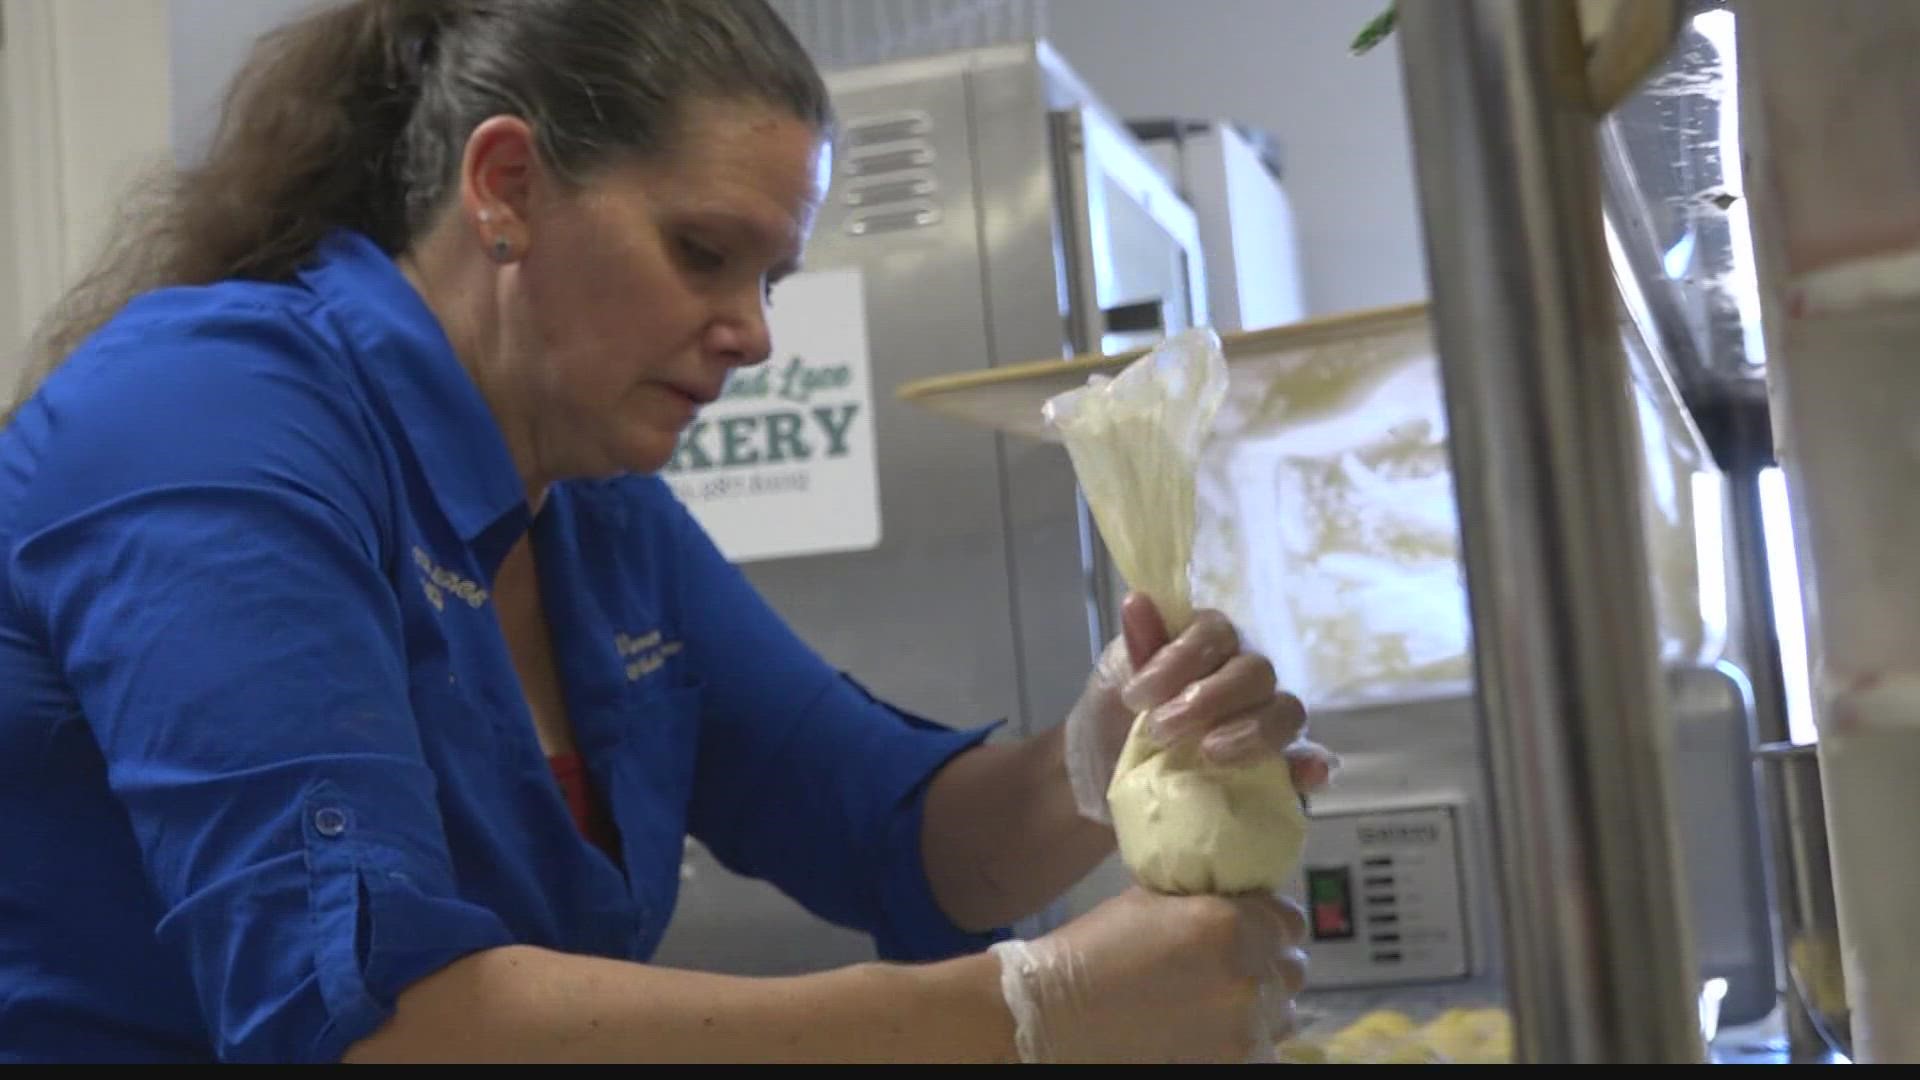 Vanessa Stiegmann started giving away cupcakes to teachers in 2018. Just this week alone, she's baking up 109,000 for Valley teachers for Teacher Appreciation Week.